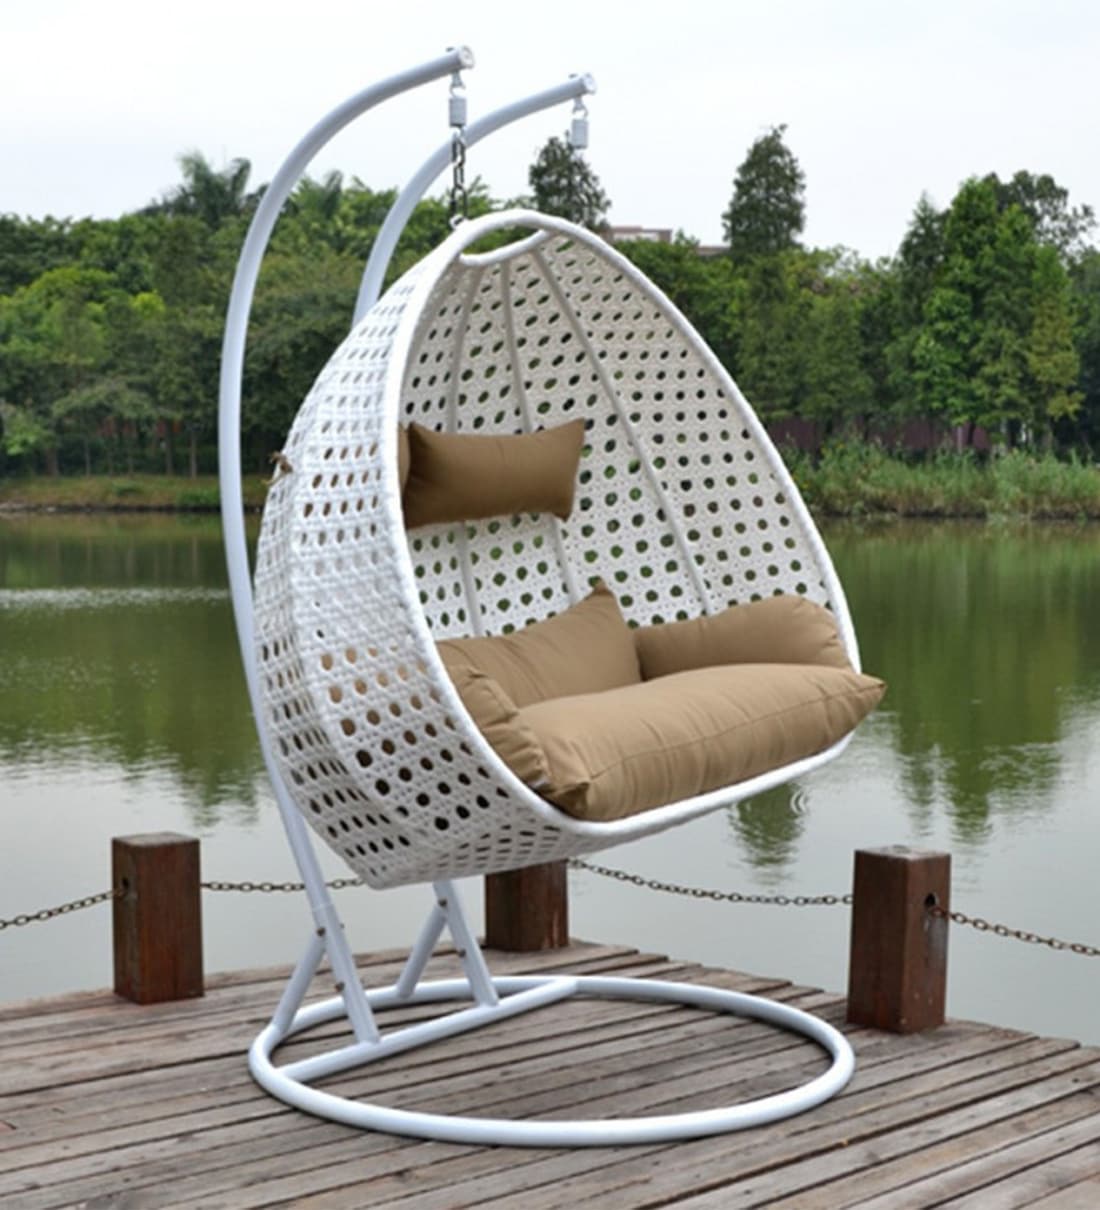 Dreamline Double Seater Hanging Swing Jhula With Stand For Balcony/Garden/Indoor